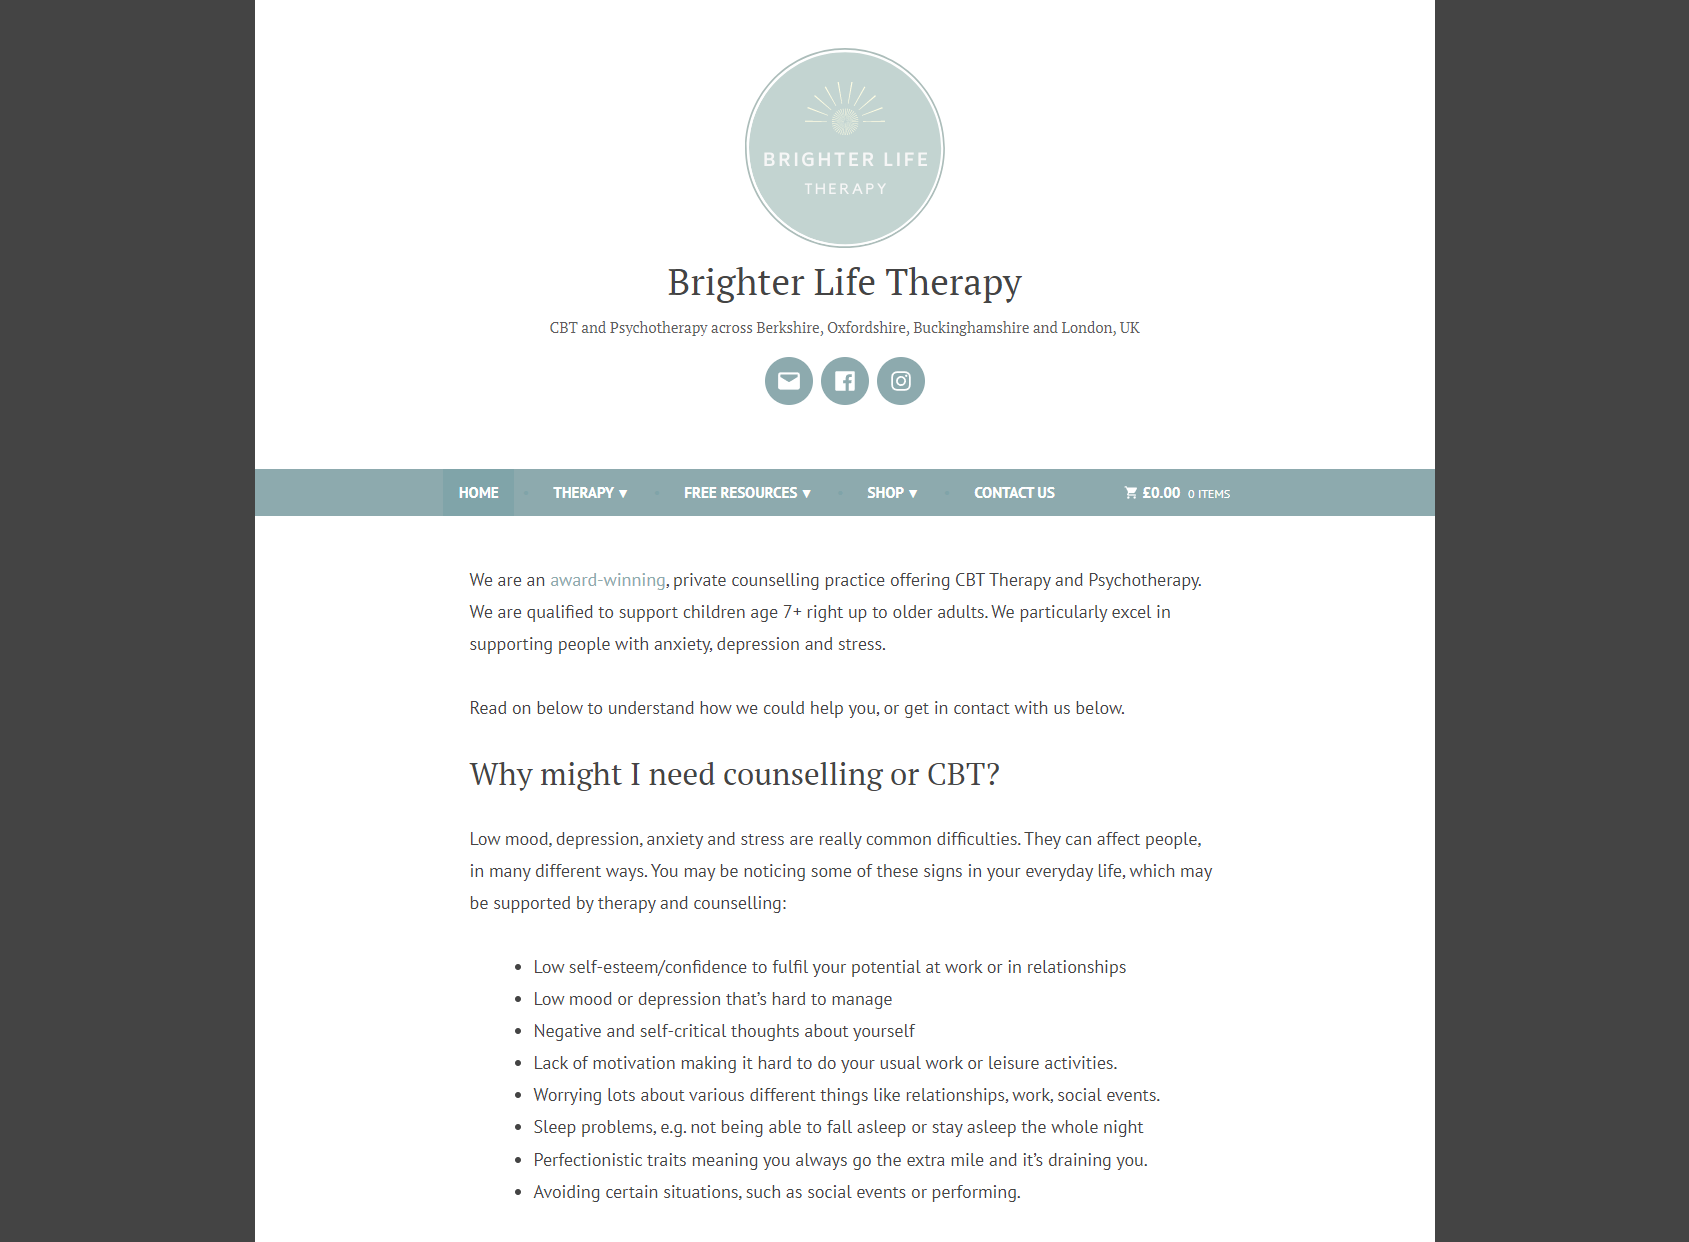 Brighter Life Therapy